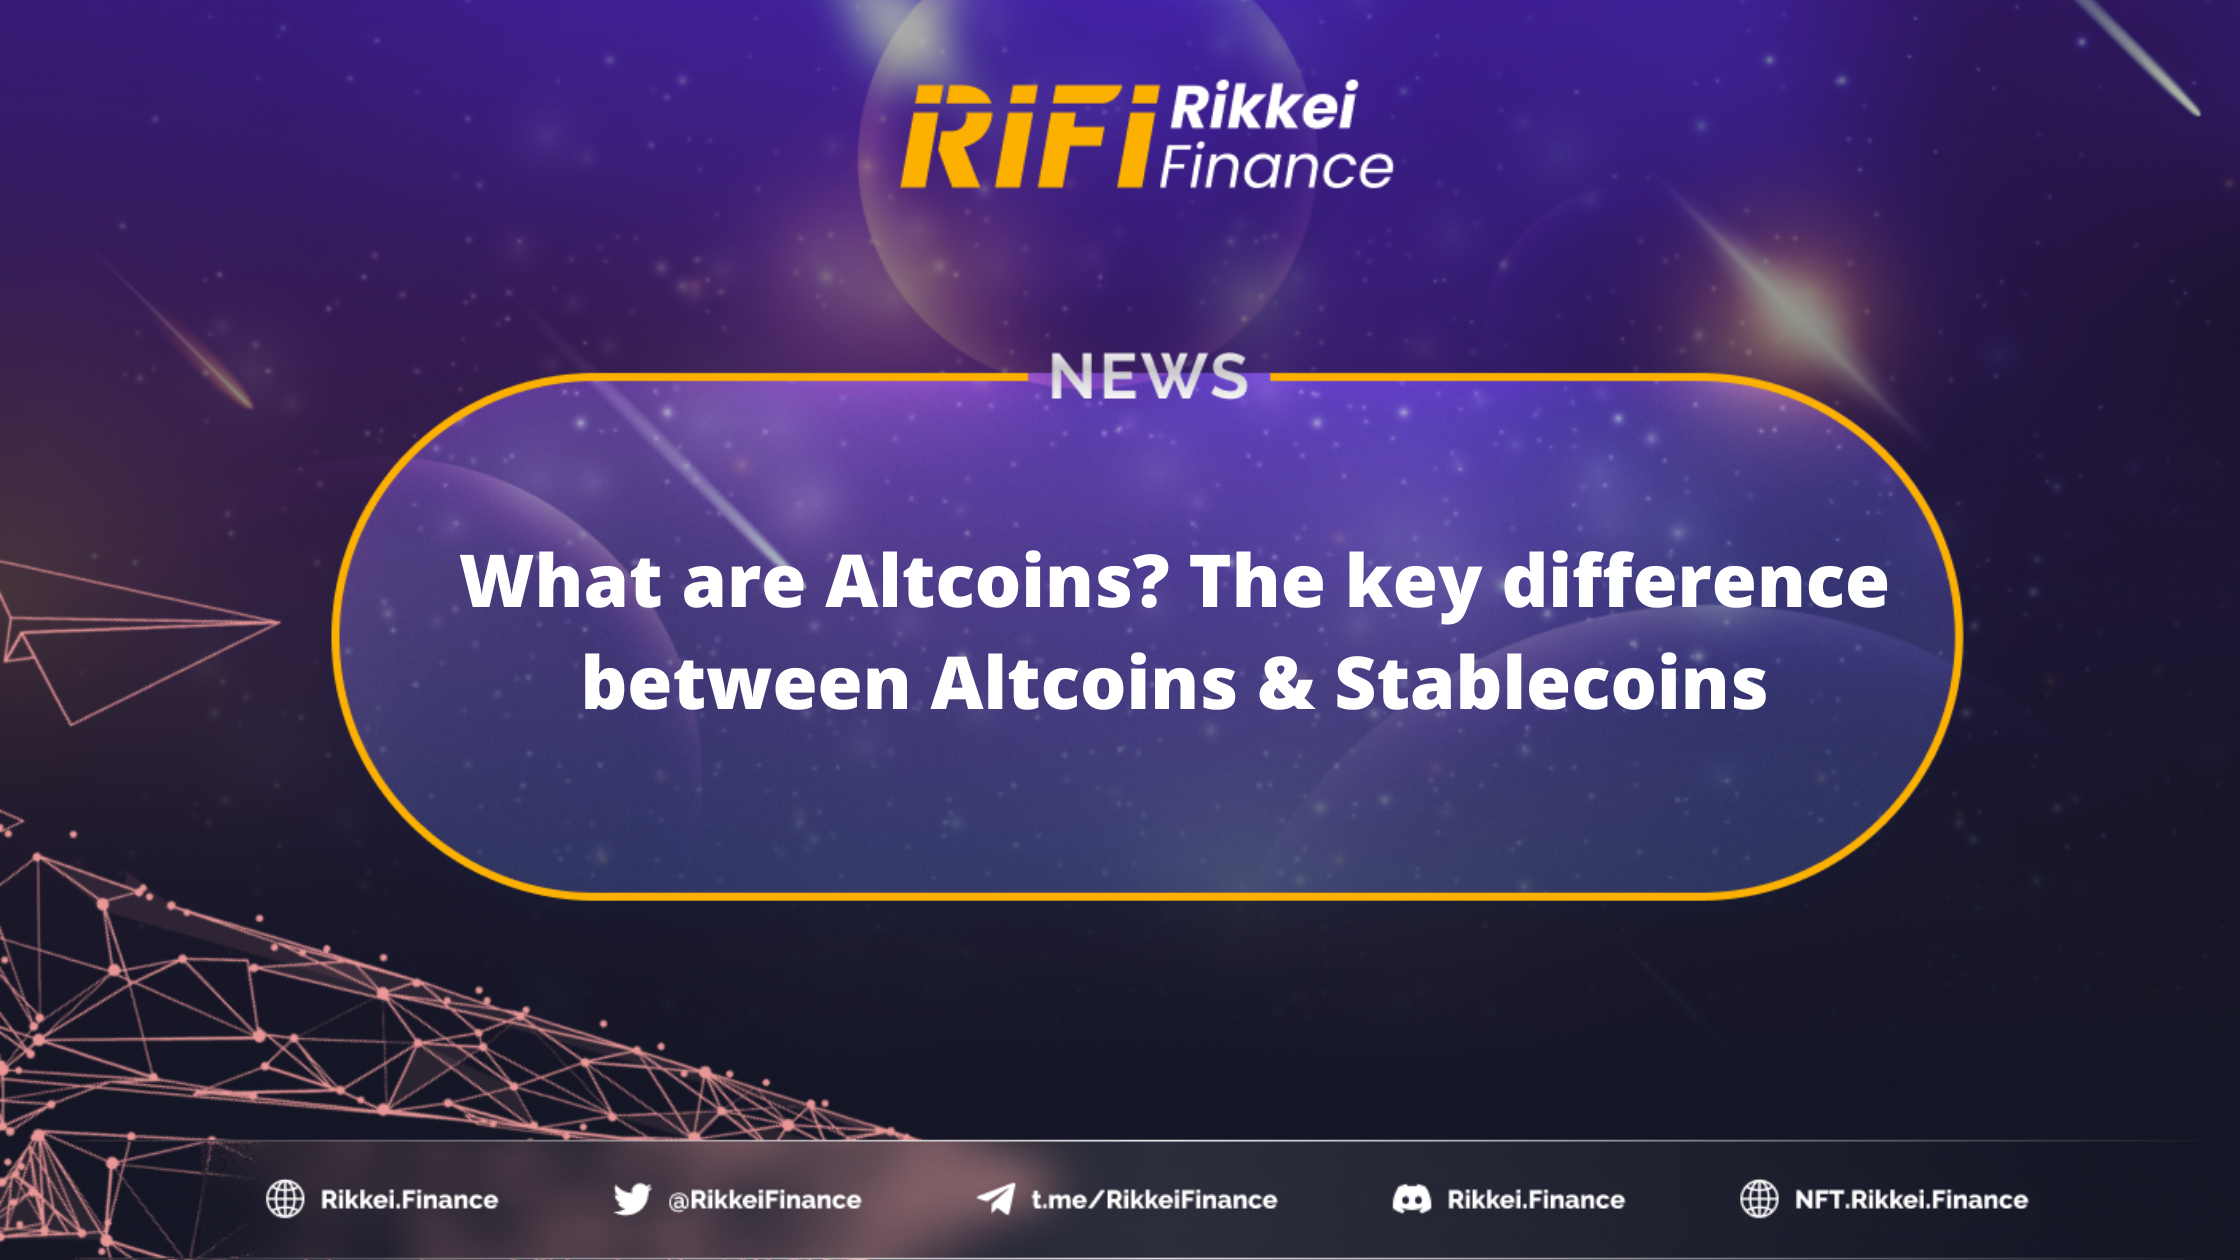 What are Altcoins? The key difference between Altcoins & Stablecoins